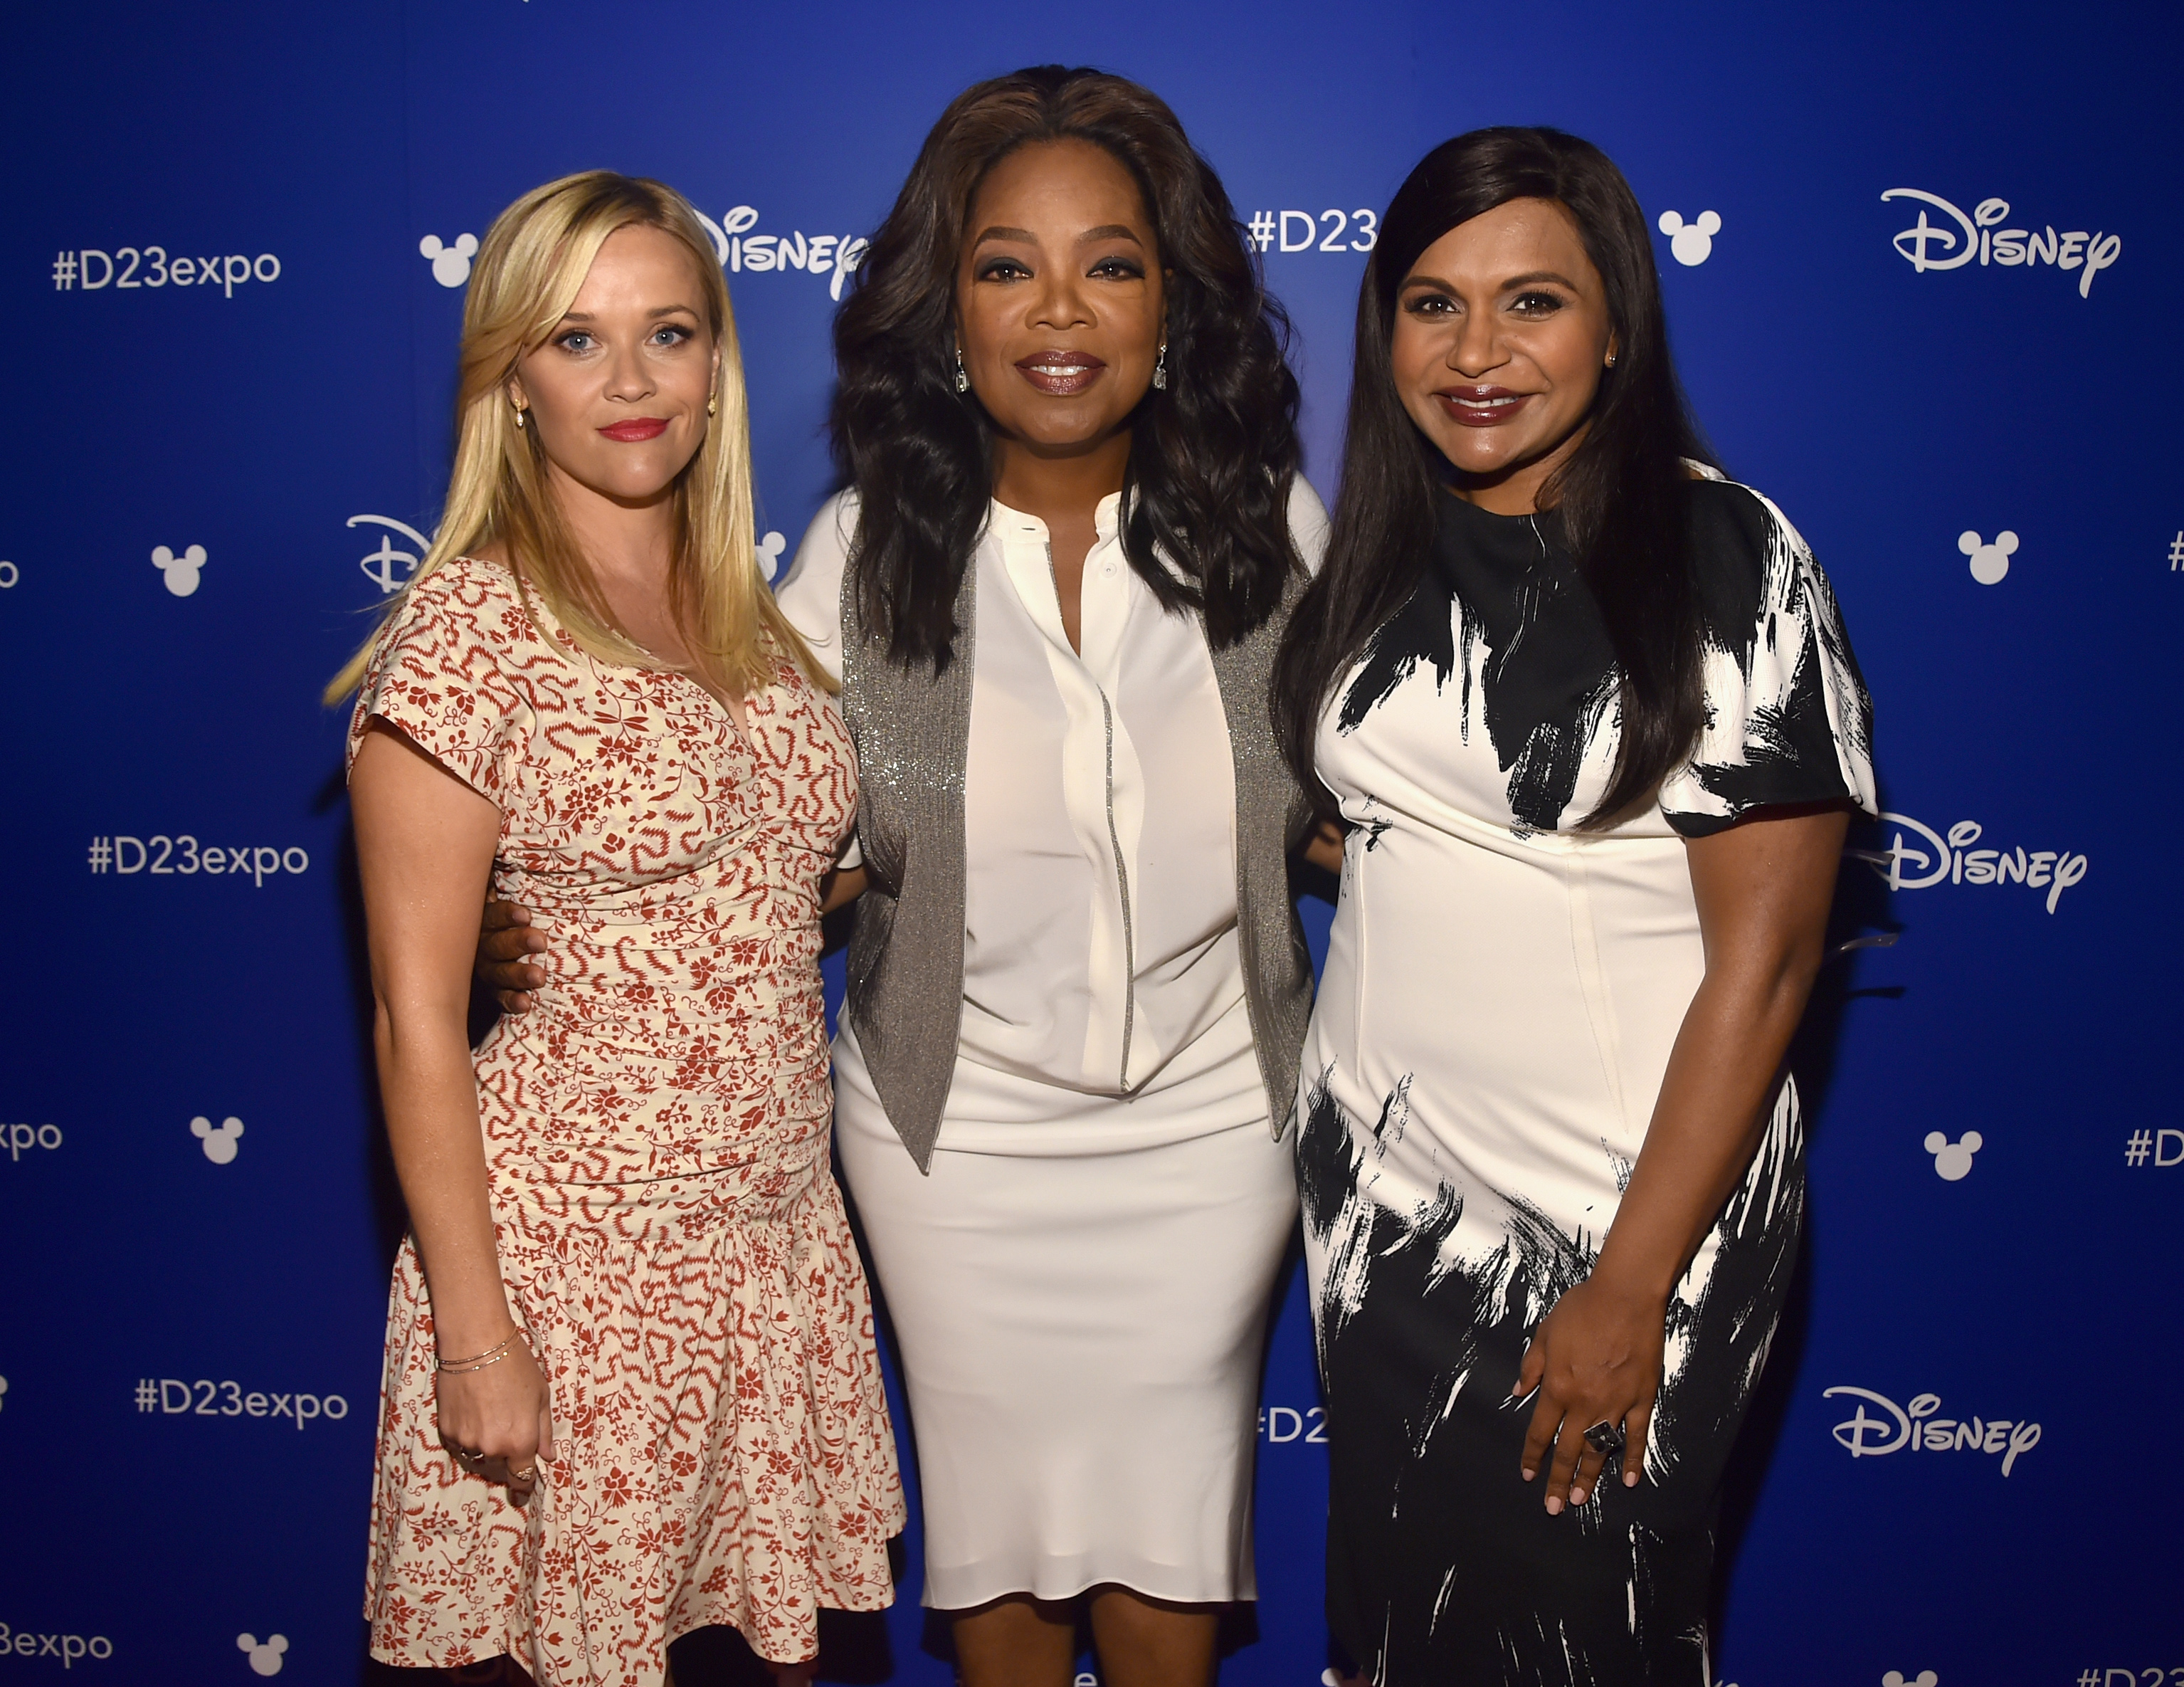 Reese Witherspoon, Oprah, and Mindy Kaling